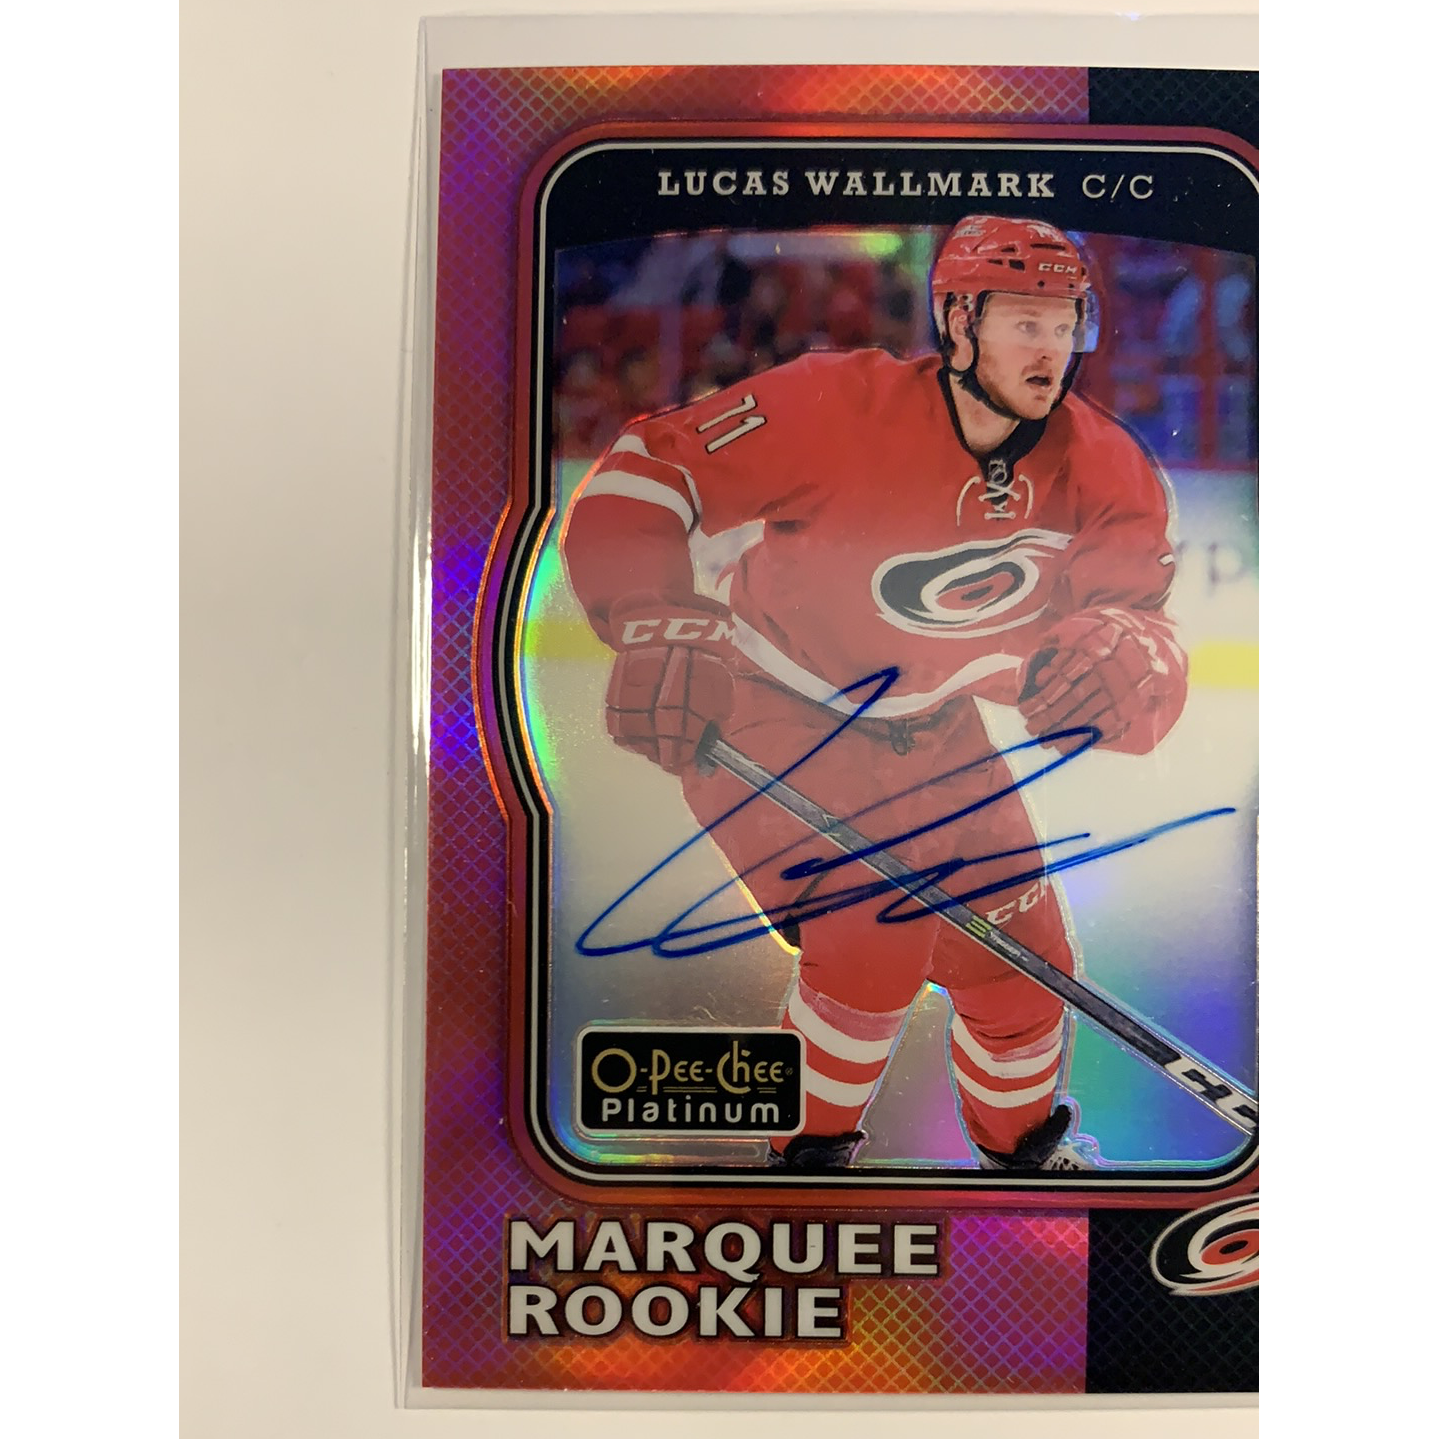  2017-18 O-Pee-Chee Lucas Wallmark Red Rainbow Marquee Rookie Auto  Local Legends Cards & Collectibles